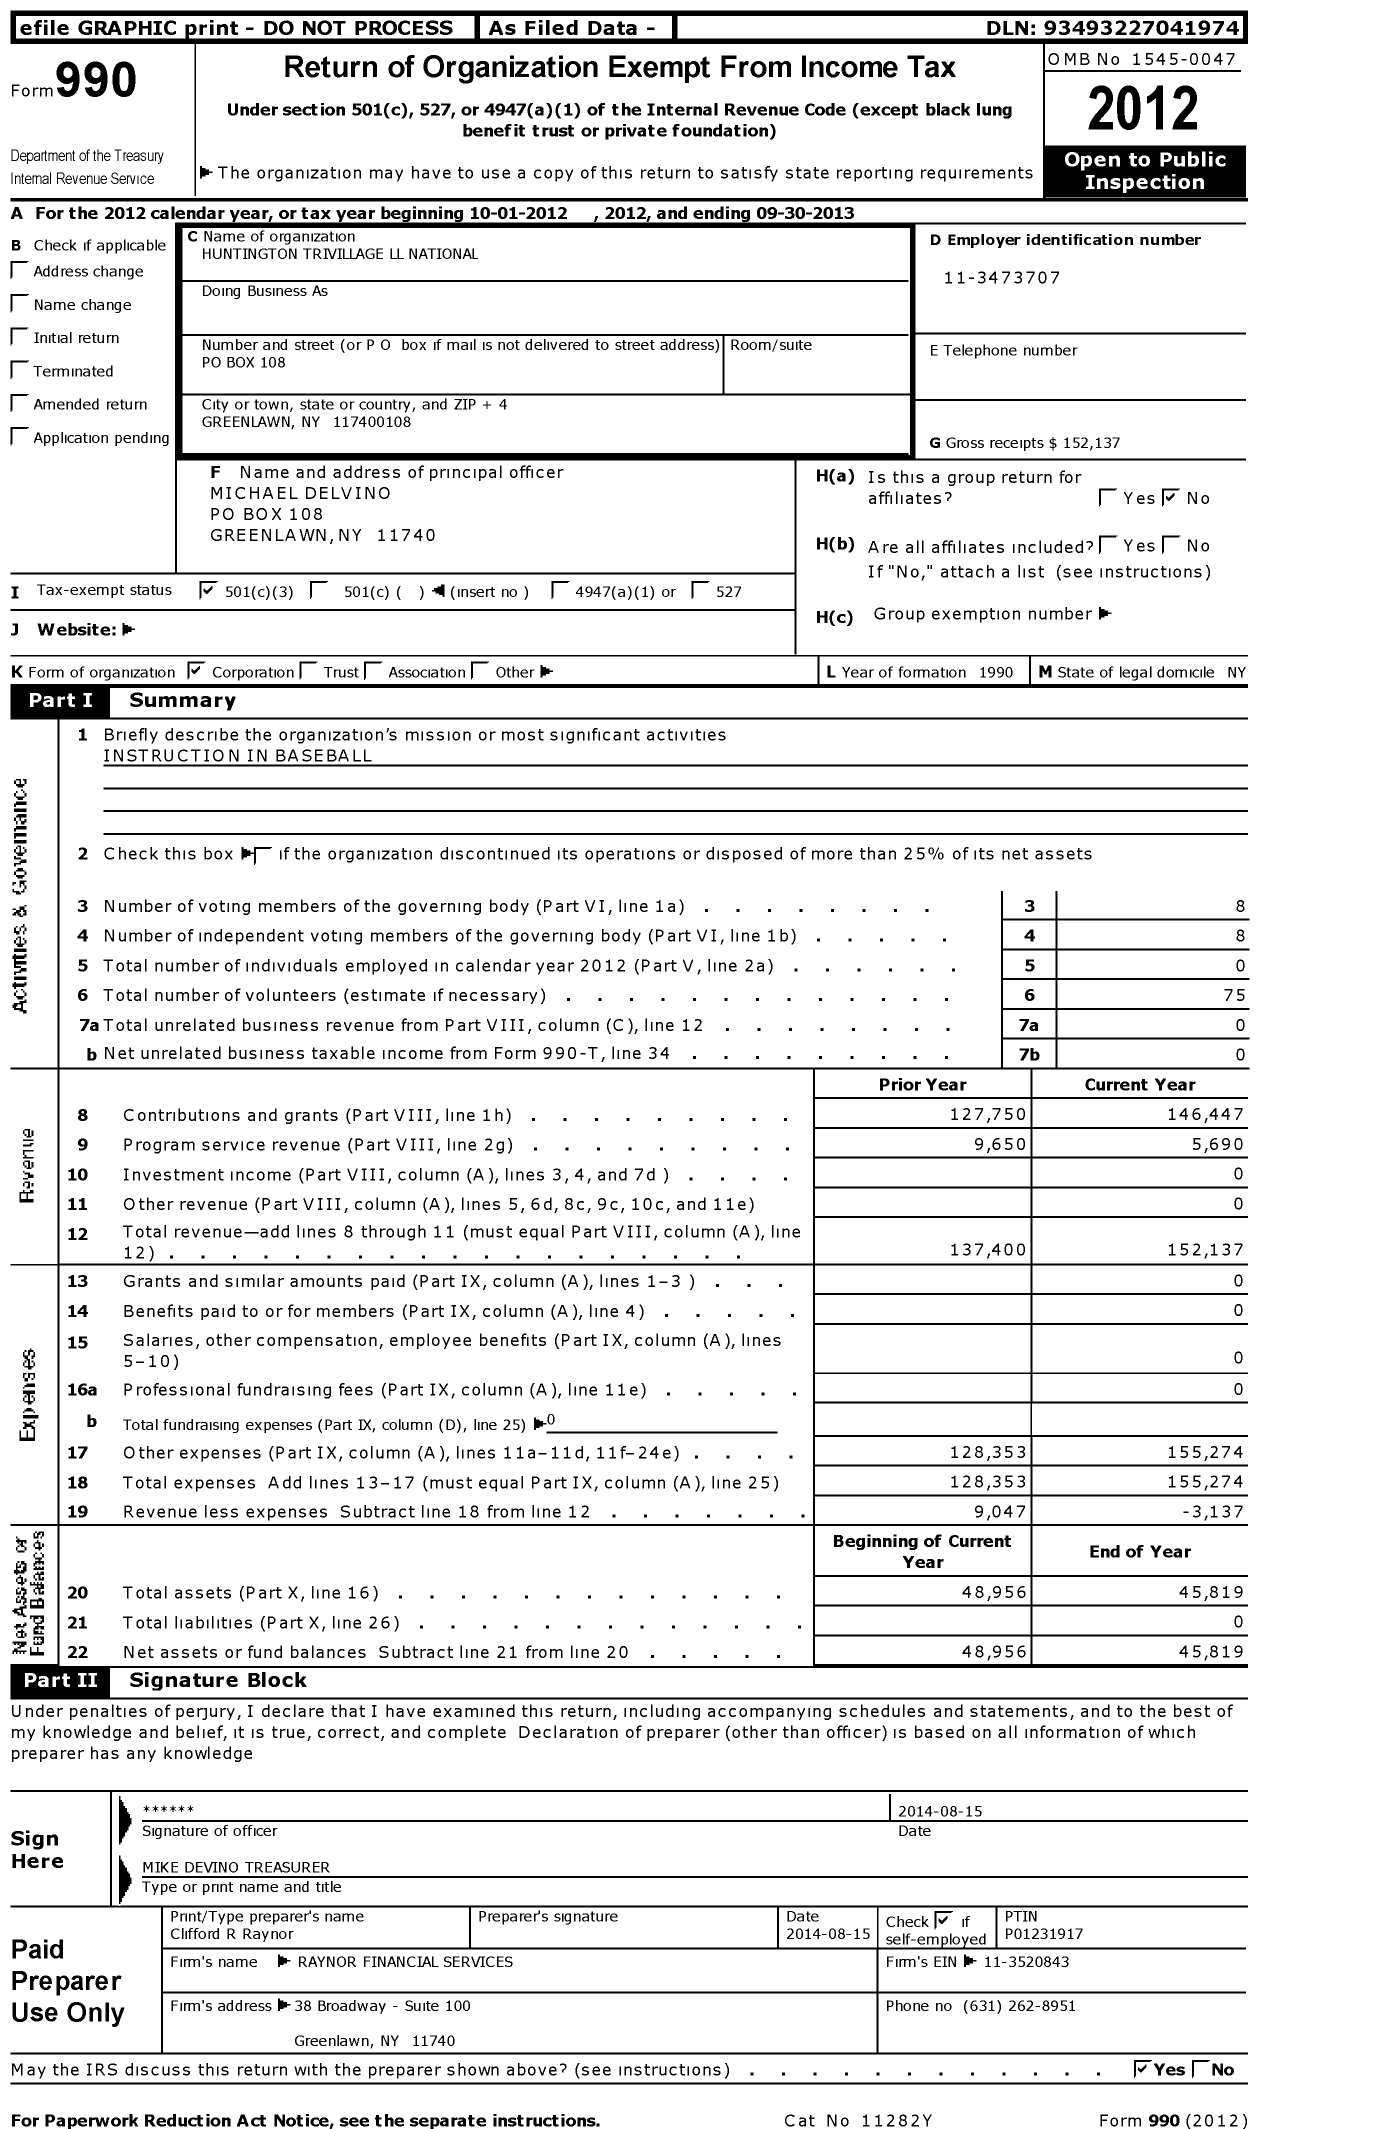 Image of first page of 2012 Form 990 for Little League Baseball - 2323419 Huntington Tri-Vill Nat LL